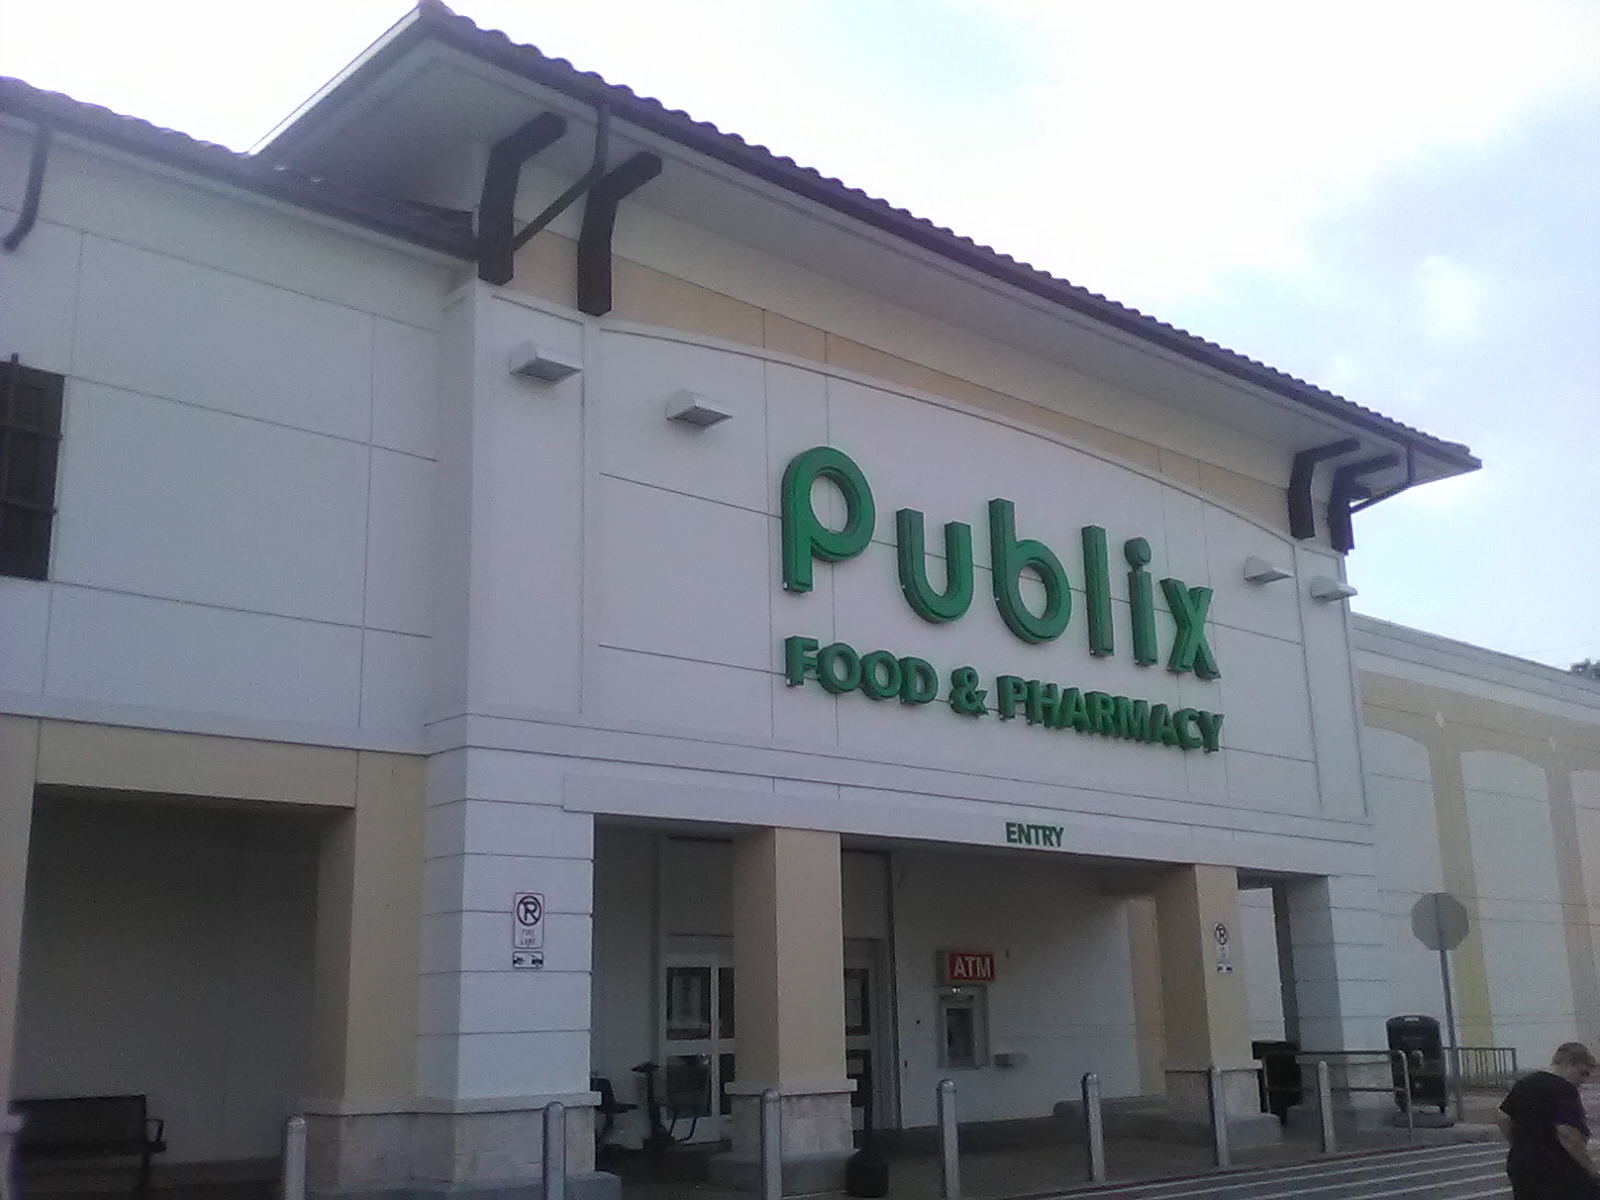 Publix Pharmacy at Sunset Point